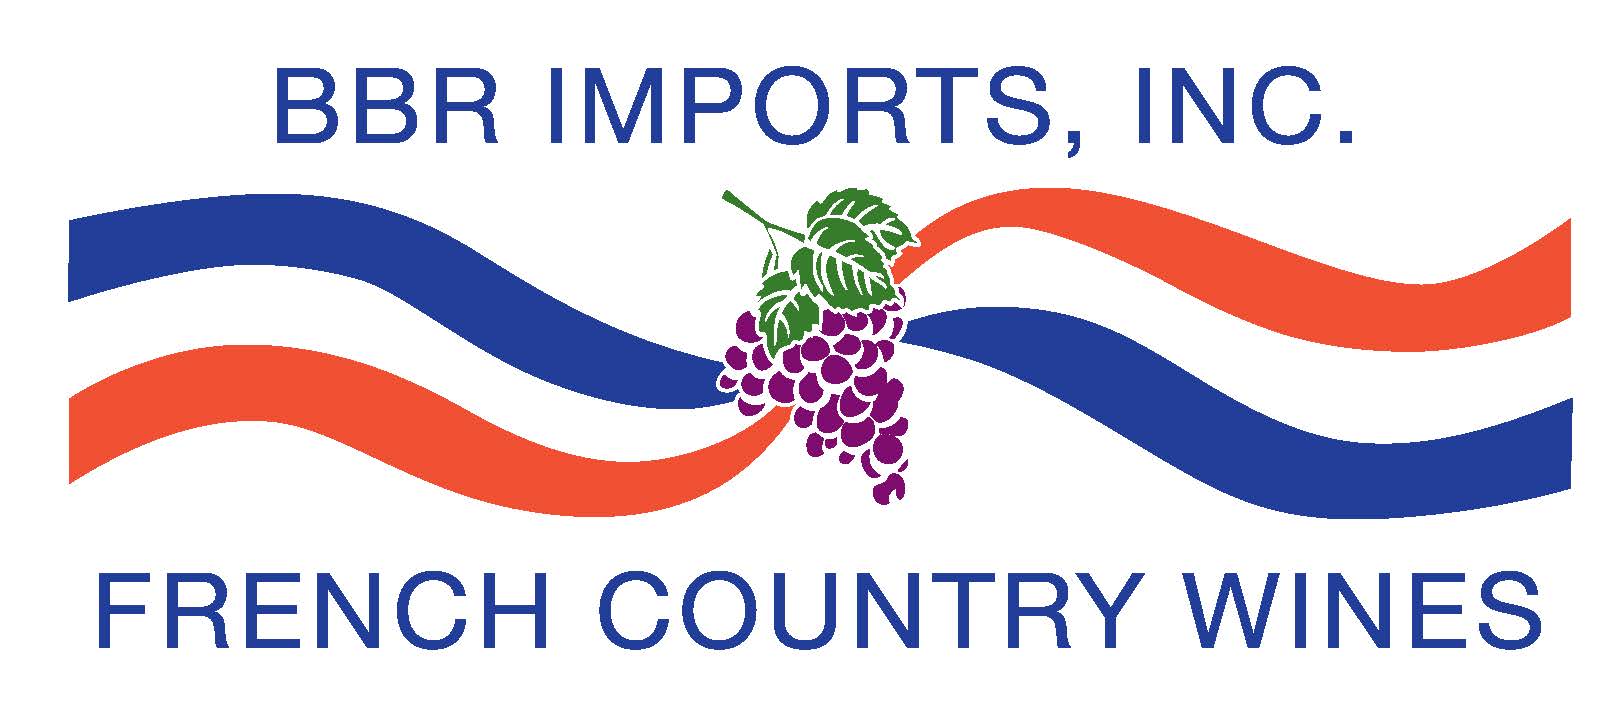 BBR Imports, Inc French Country Wines logo